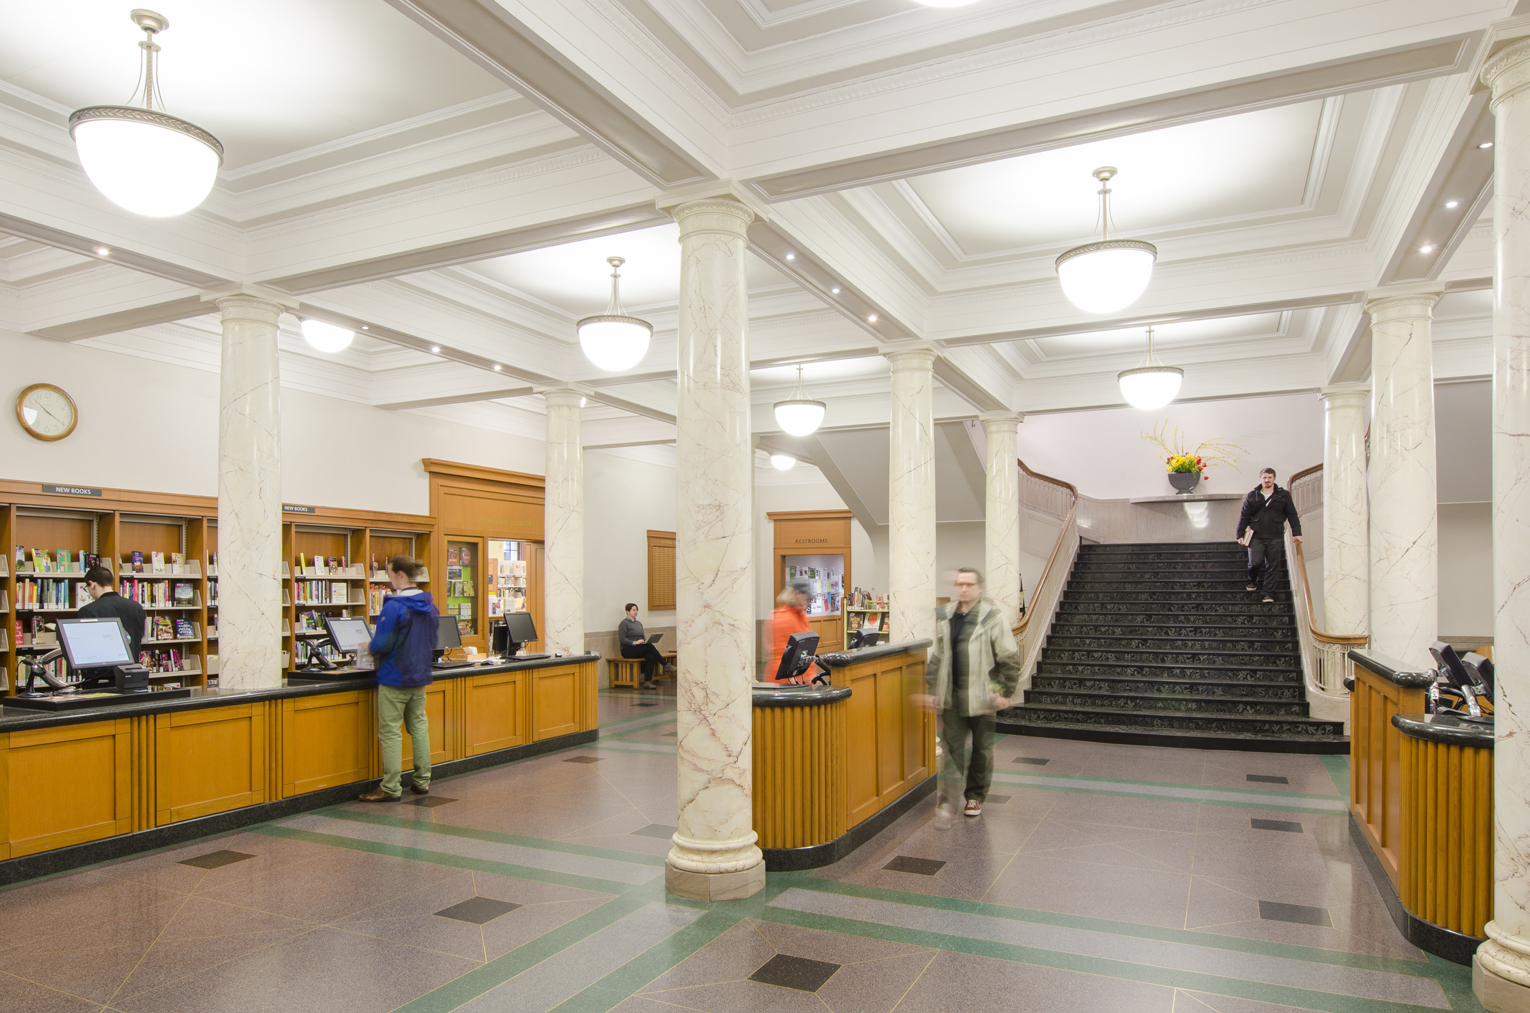 Multnomah County Central Library Rehabilitation. Large, open Georgian style library loby with marble columns flanking self check-out stationin the foreground and a dark marble grand staircase in the background. Box beam ceilings can be seen overhead and the floor is a simply patterned geometric terrazzo.